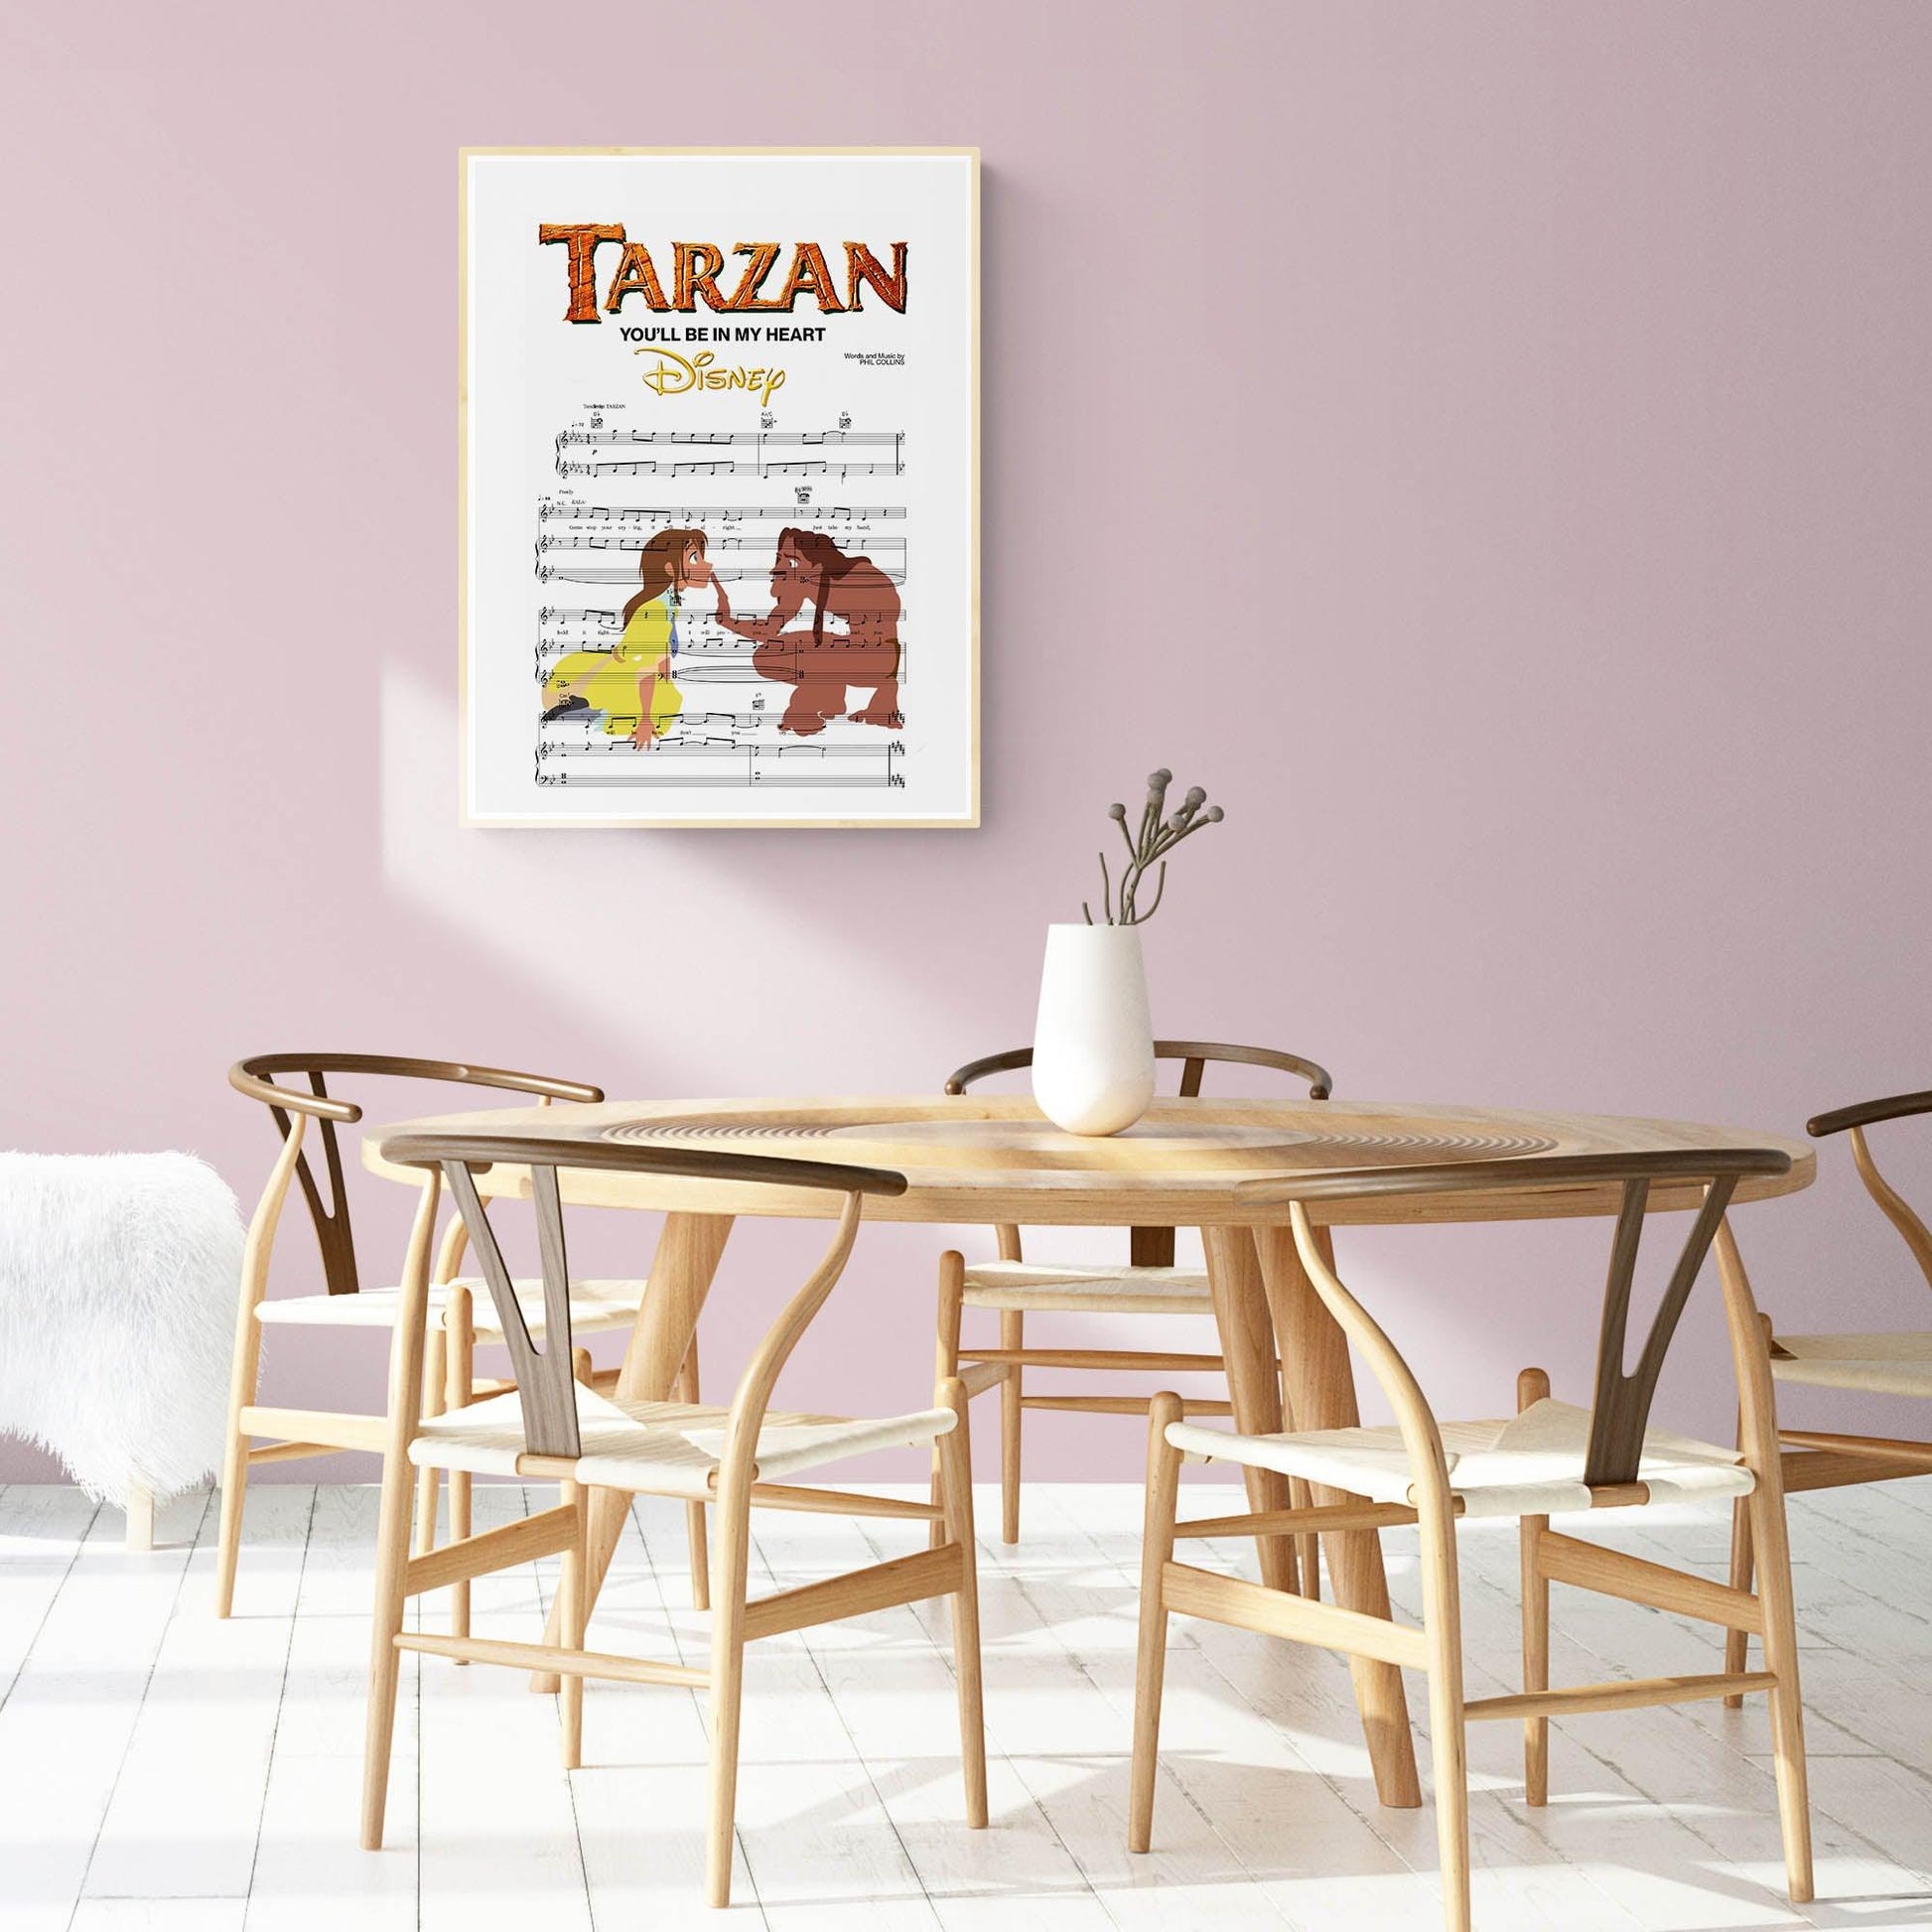 Bring a piece of classic Disney magic into your home with this stunning Tarzan Print. This high-quality art print is based on Disney's classic animated film and characters. The perfect piece of wall décor to show off your enthusiasm for the Disney's song and lyrics, this print will make the perfect addition to any art wall. With vibrant colors and a unique design, this one-of-a-kind print is sure to bring joy to your living space. Add some Disney charm with this timeless Tarzan print!